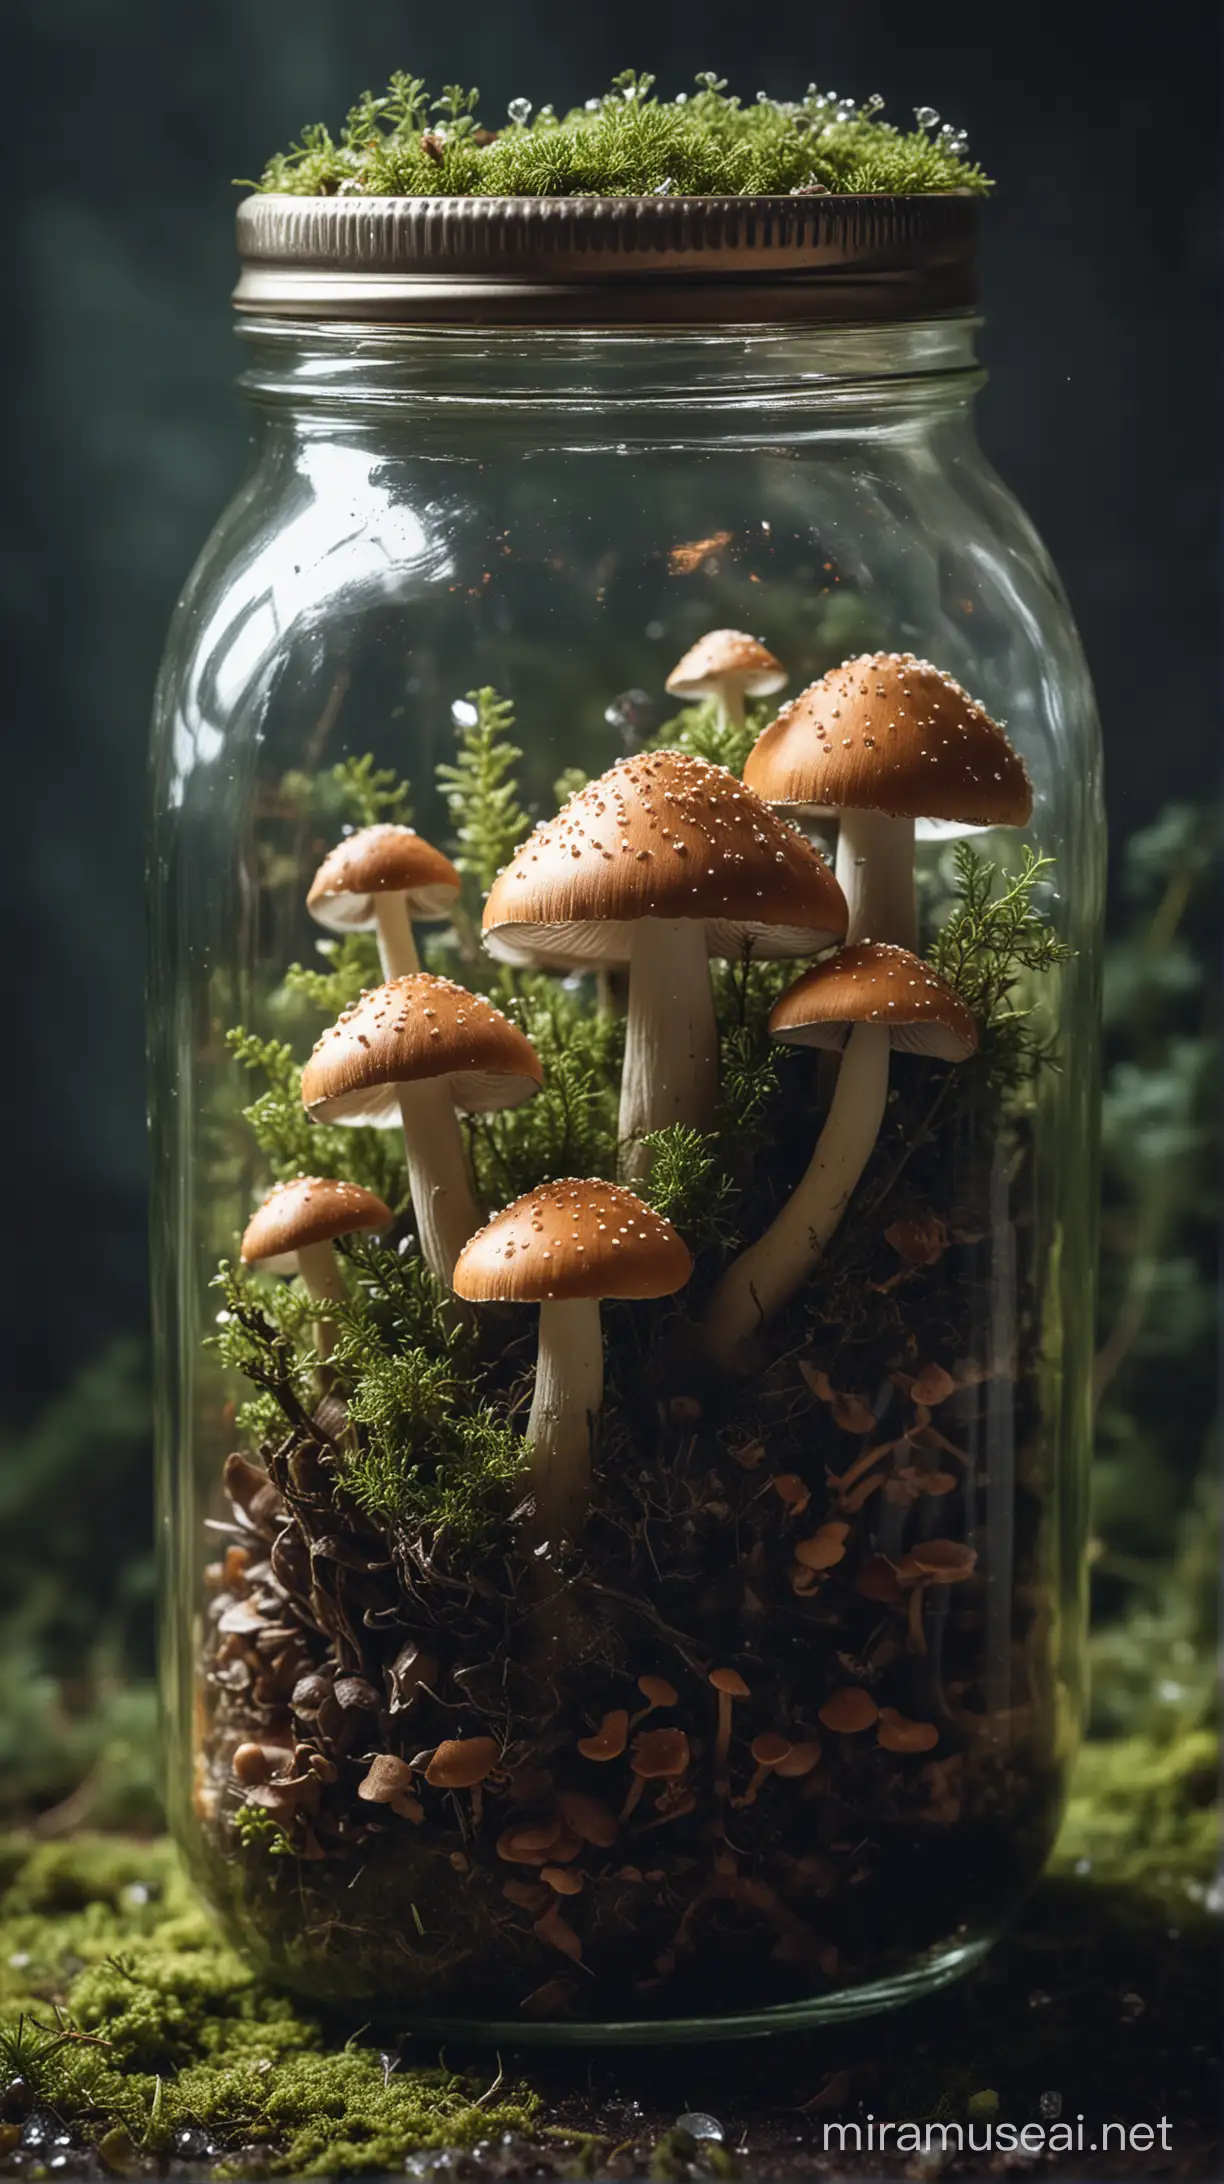 Magical mushrooms in a glass mason jar with moss and crystals. Moody style